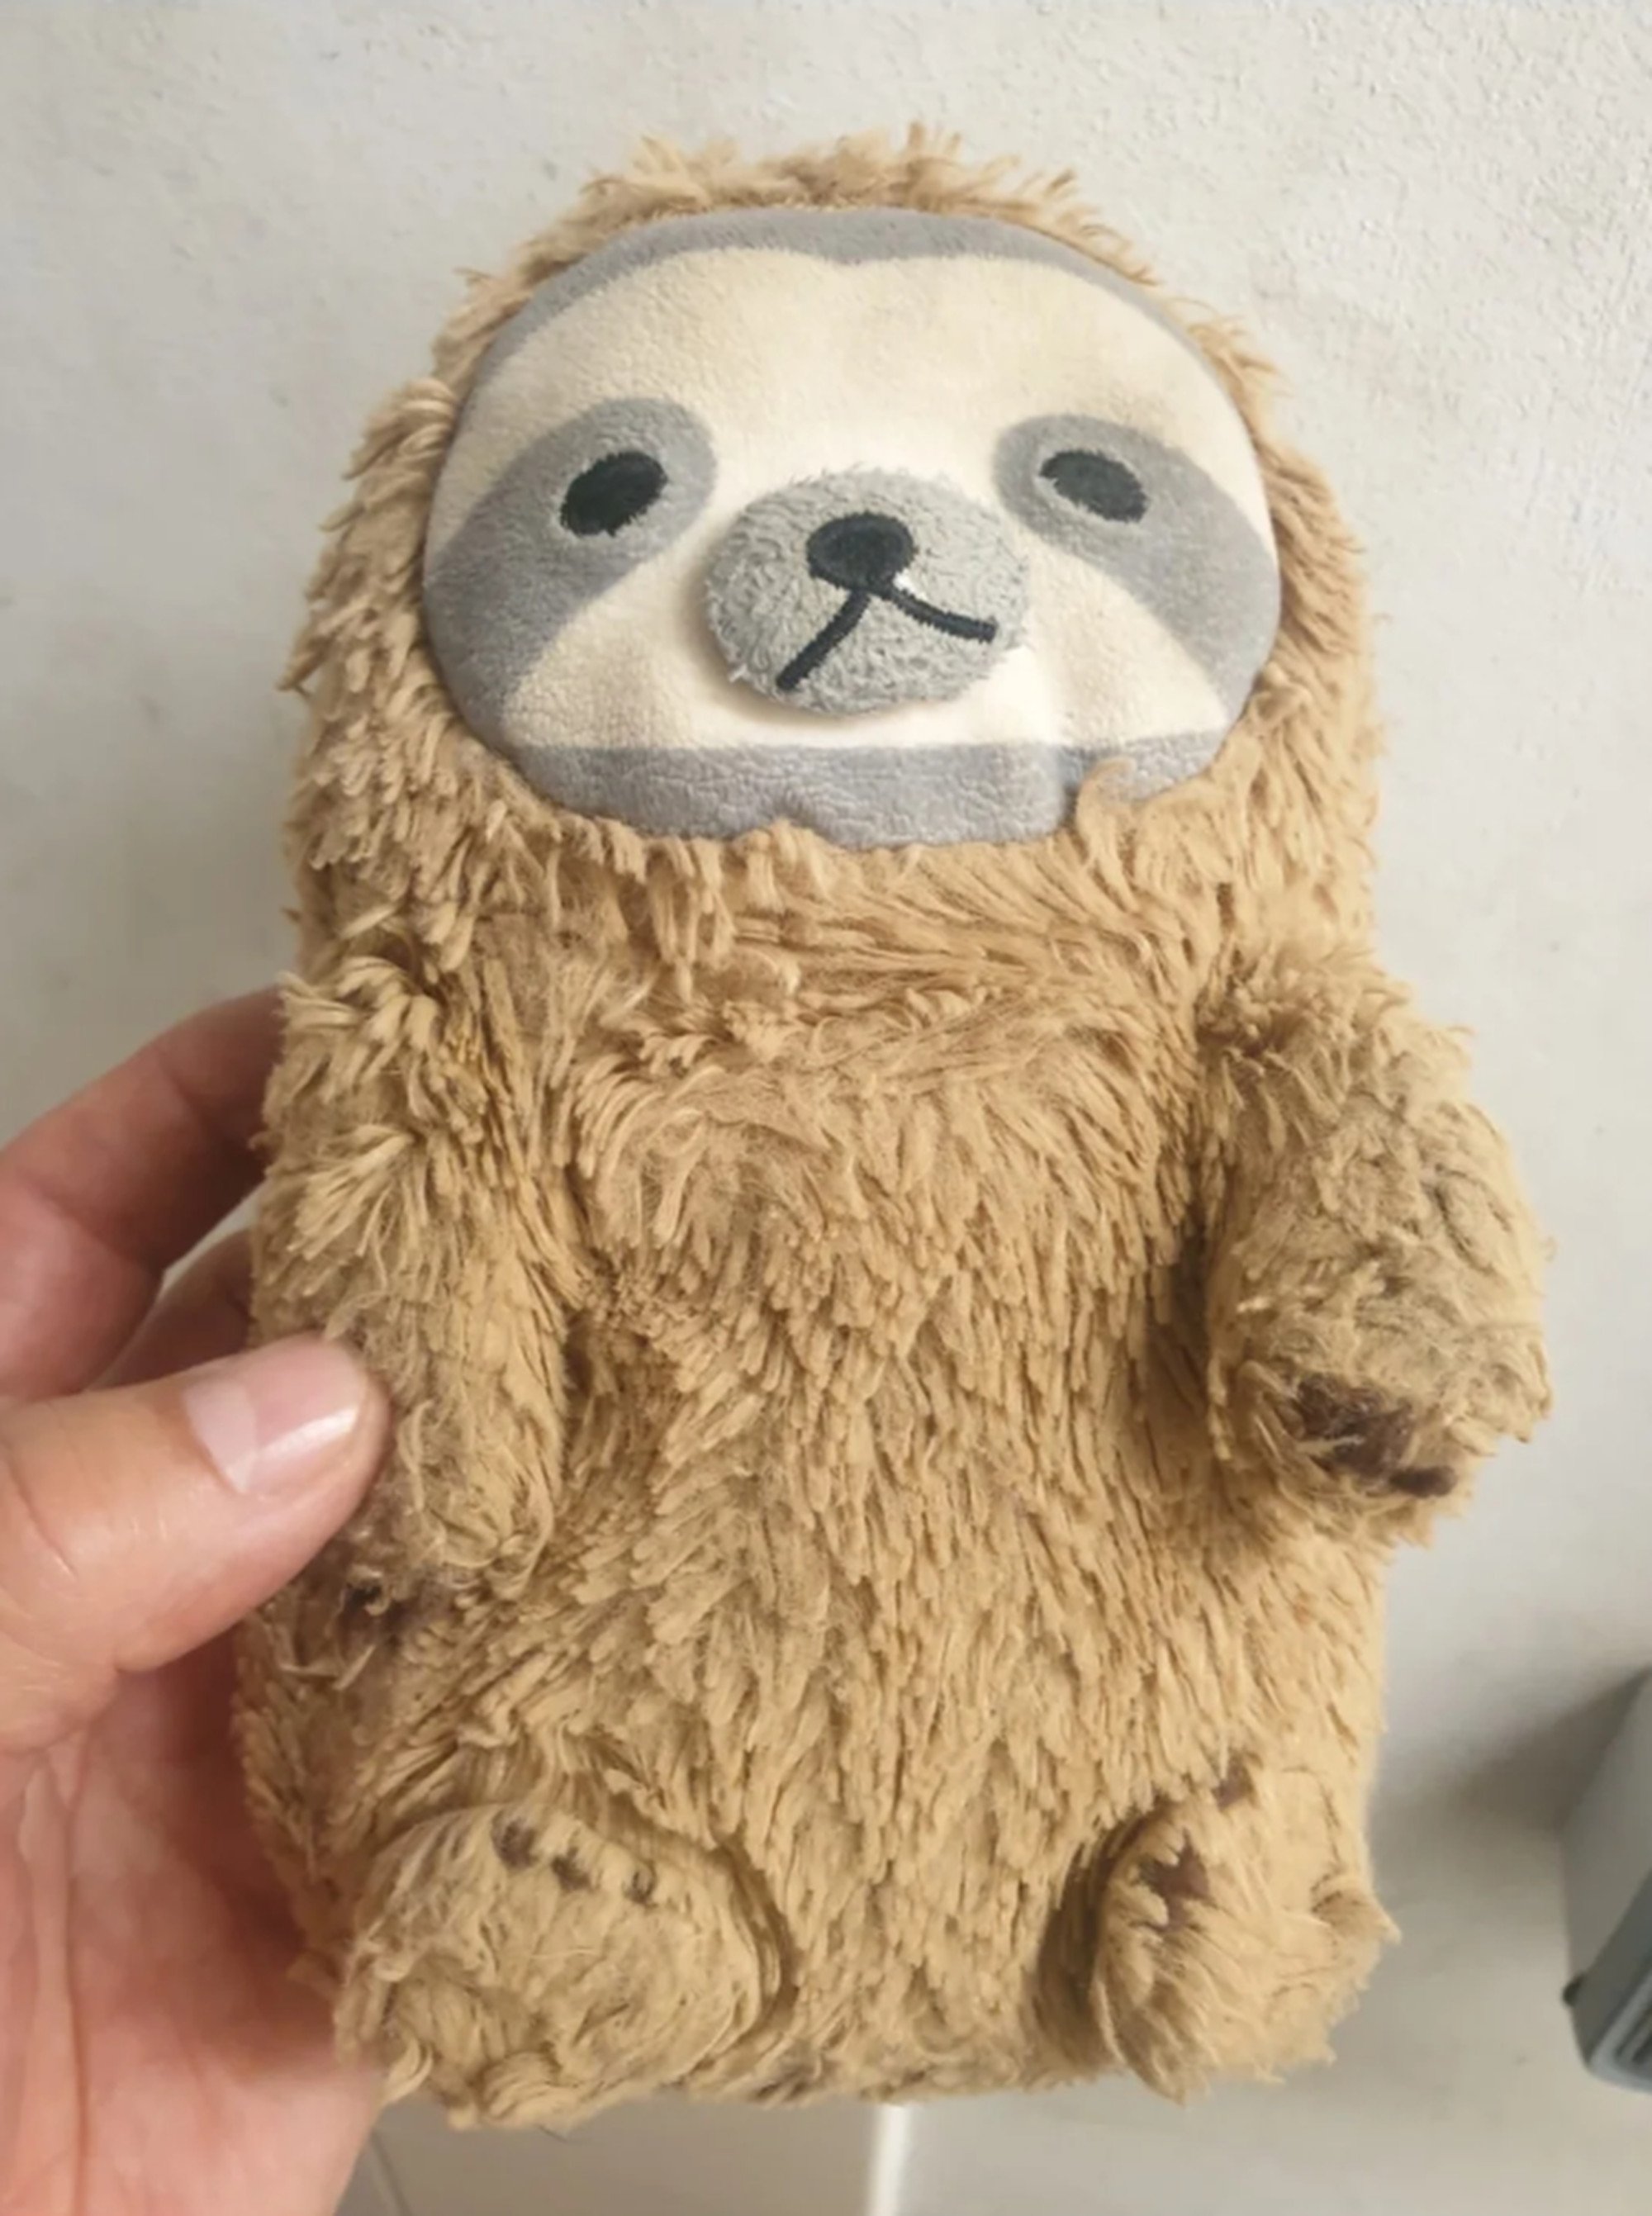 The man considered his toy sloth “Bread” to be a member of his family and was distraught to lose the companion. Photo: Xiaohongshu